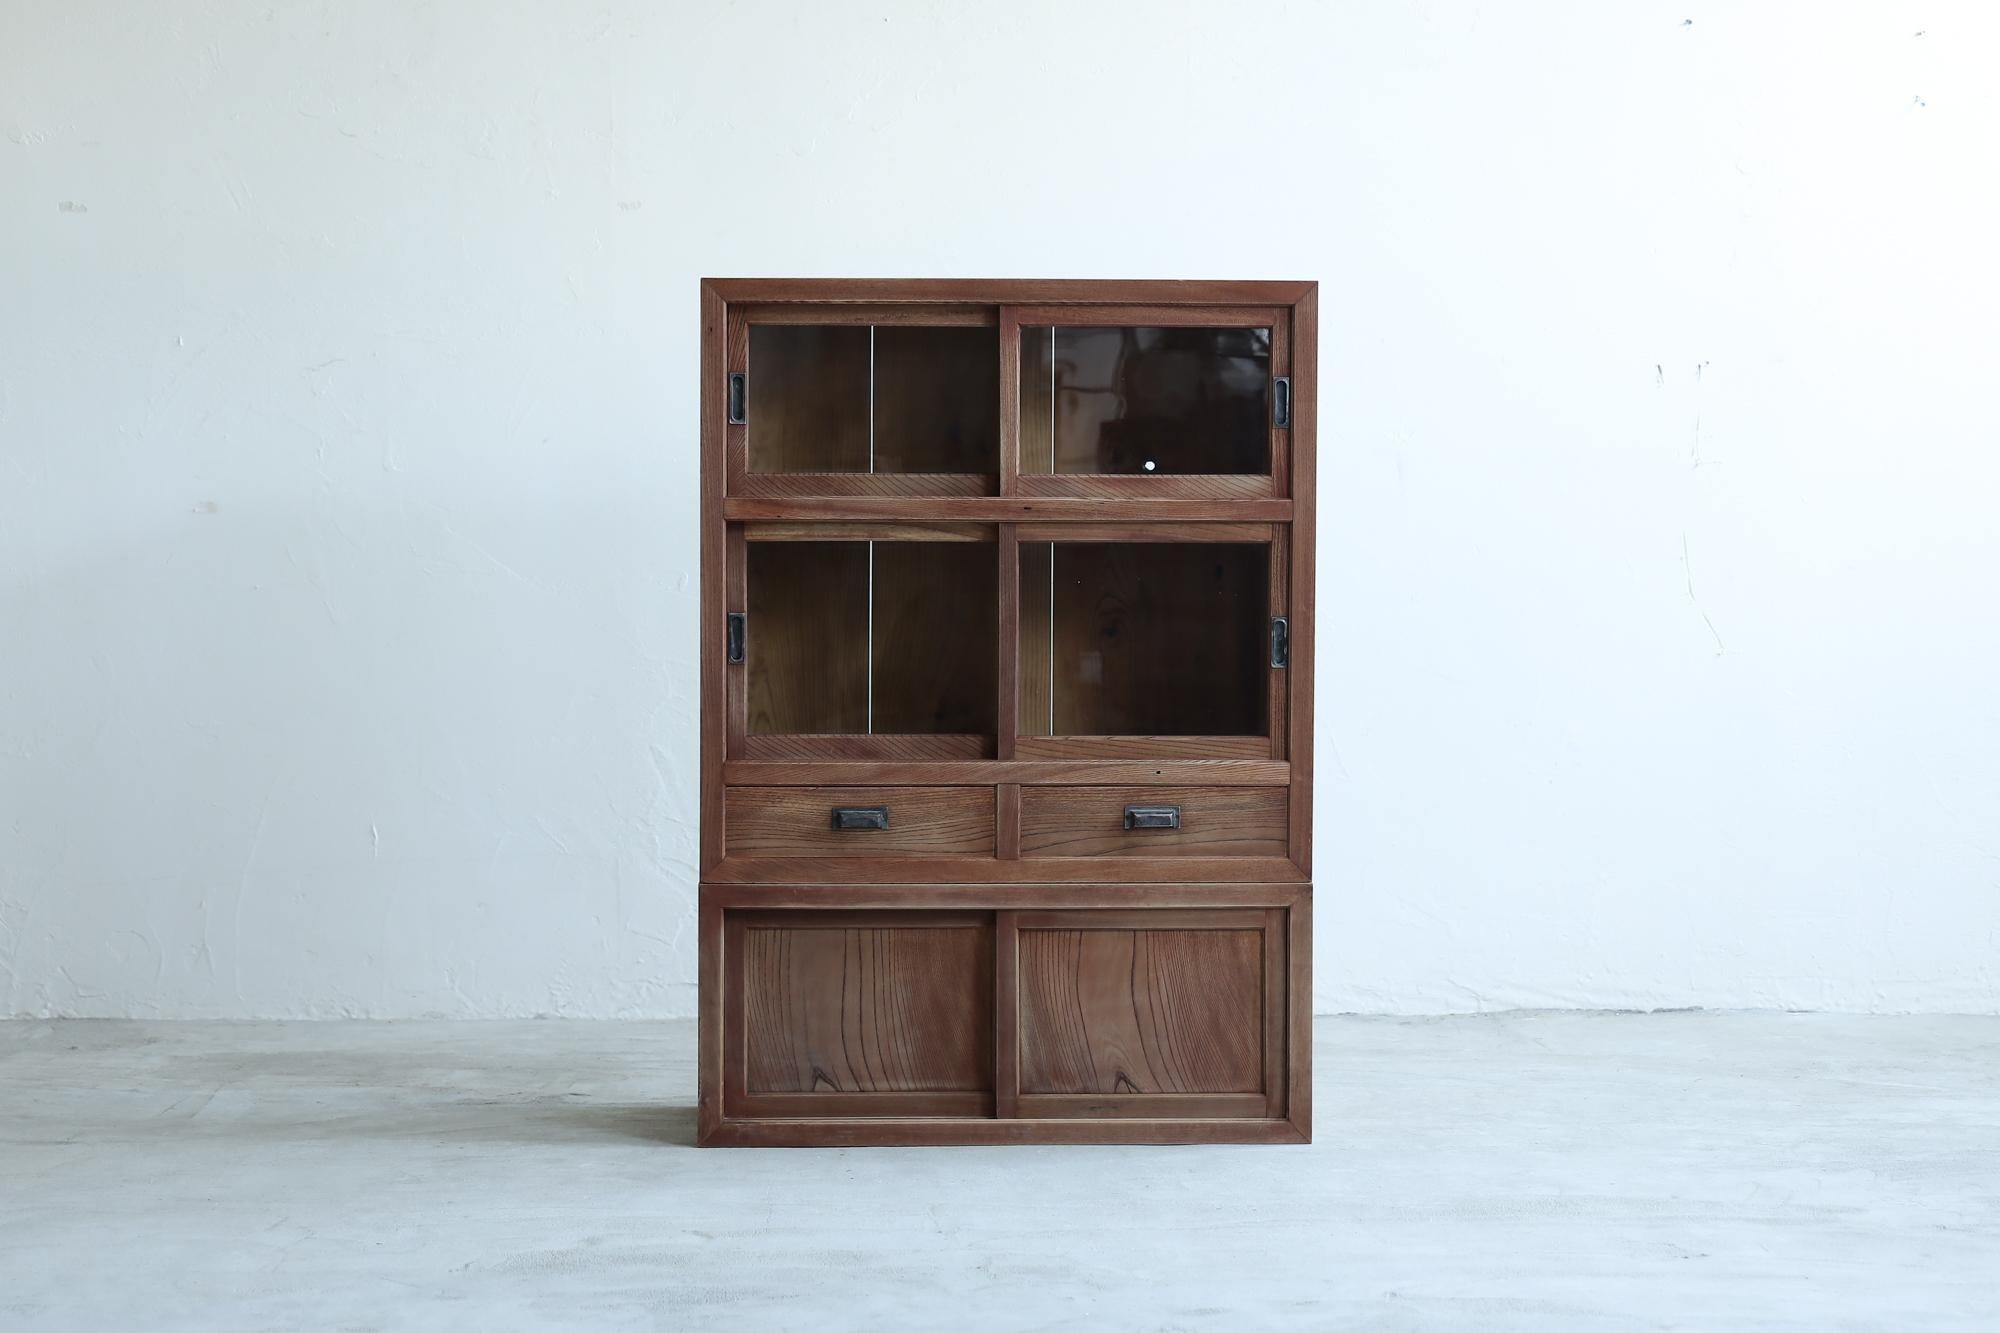 This Japanese antique cabinet was made in the Taisho period (1912-1926).

This furniture was made with the same tradition and advanced techniques as Japanese shrines.
In Japan, it was called a tansu (chest of drawers) and used to store